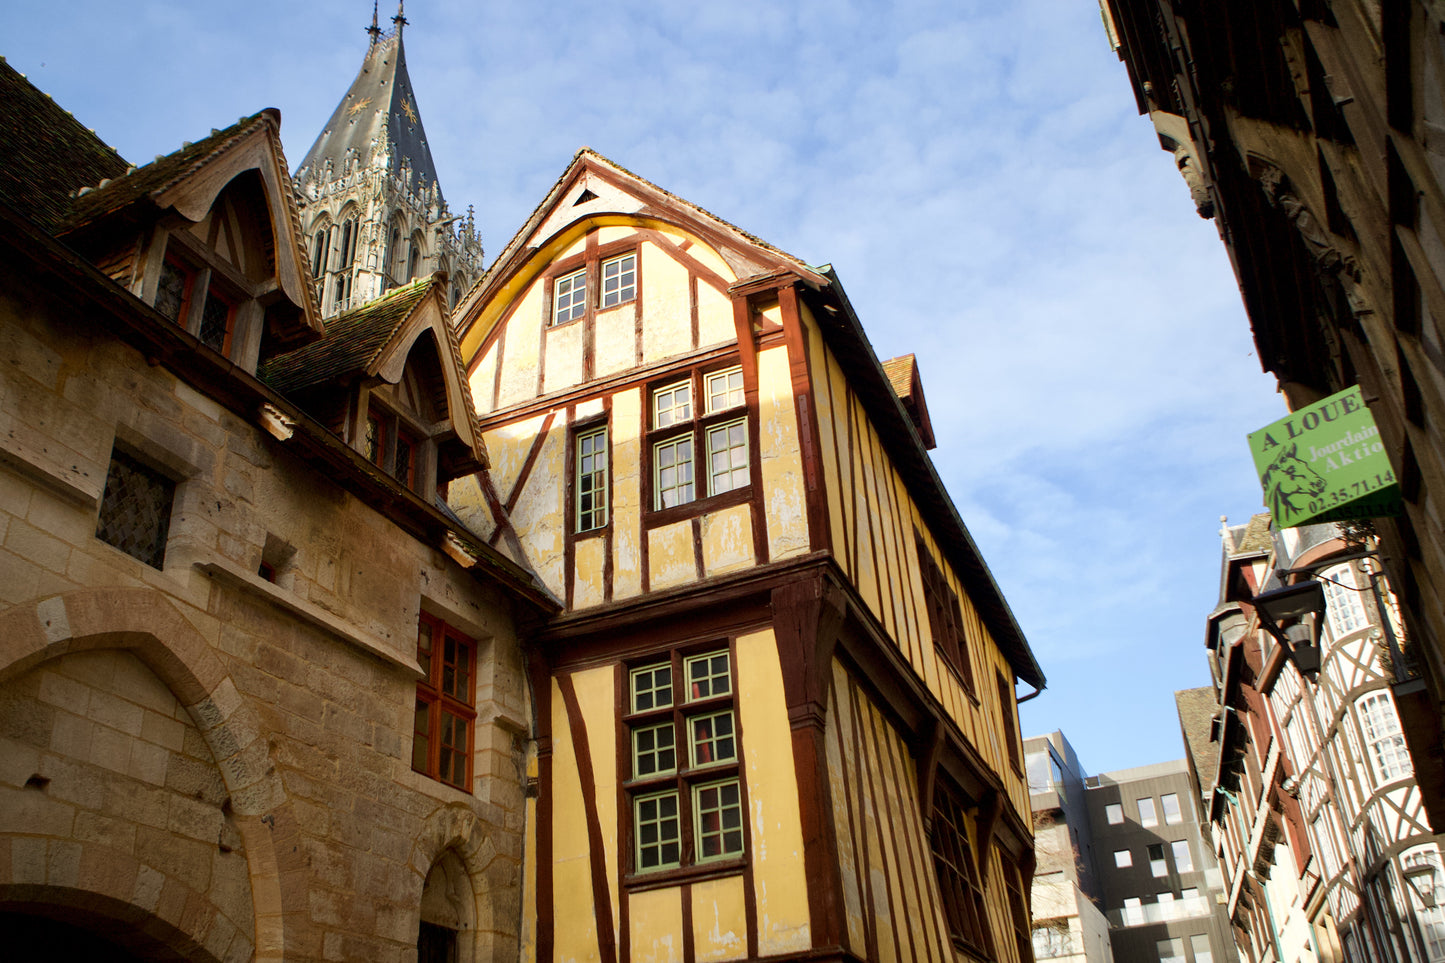 2-Day Private Tour from Paris to Mont Saint-Michel and Normandy with Loire Castles Visit